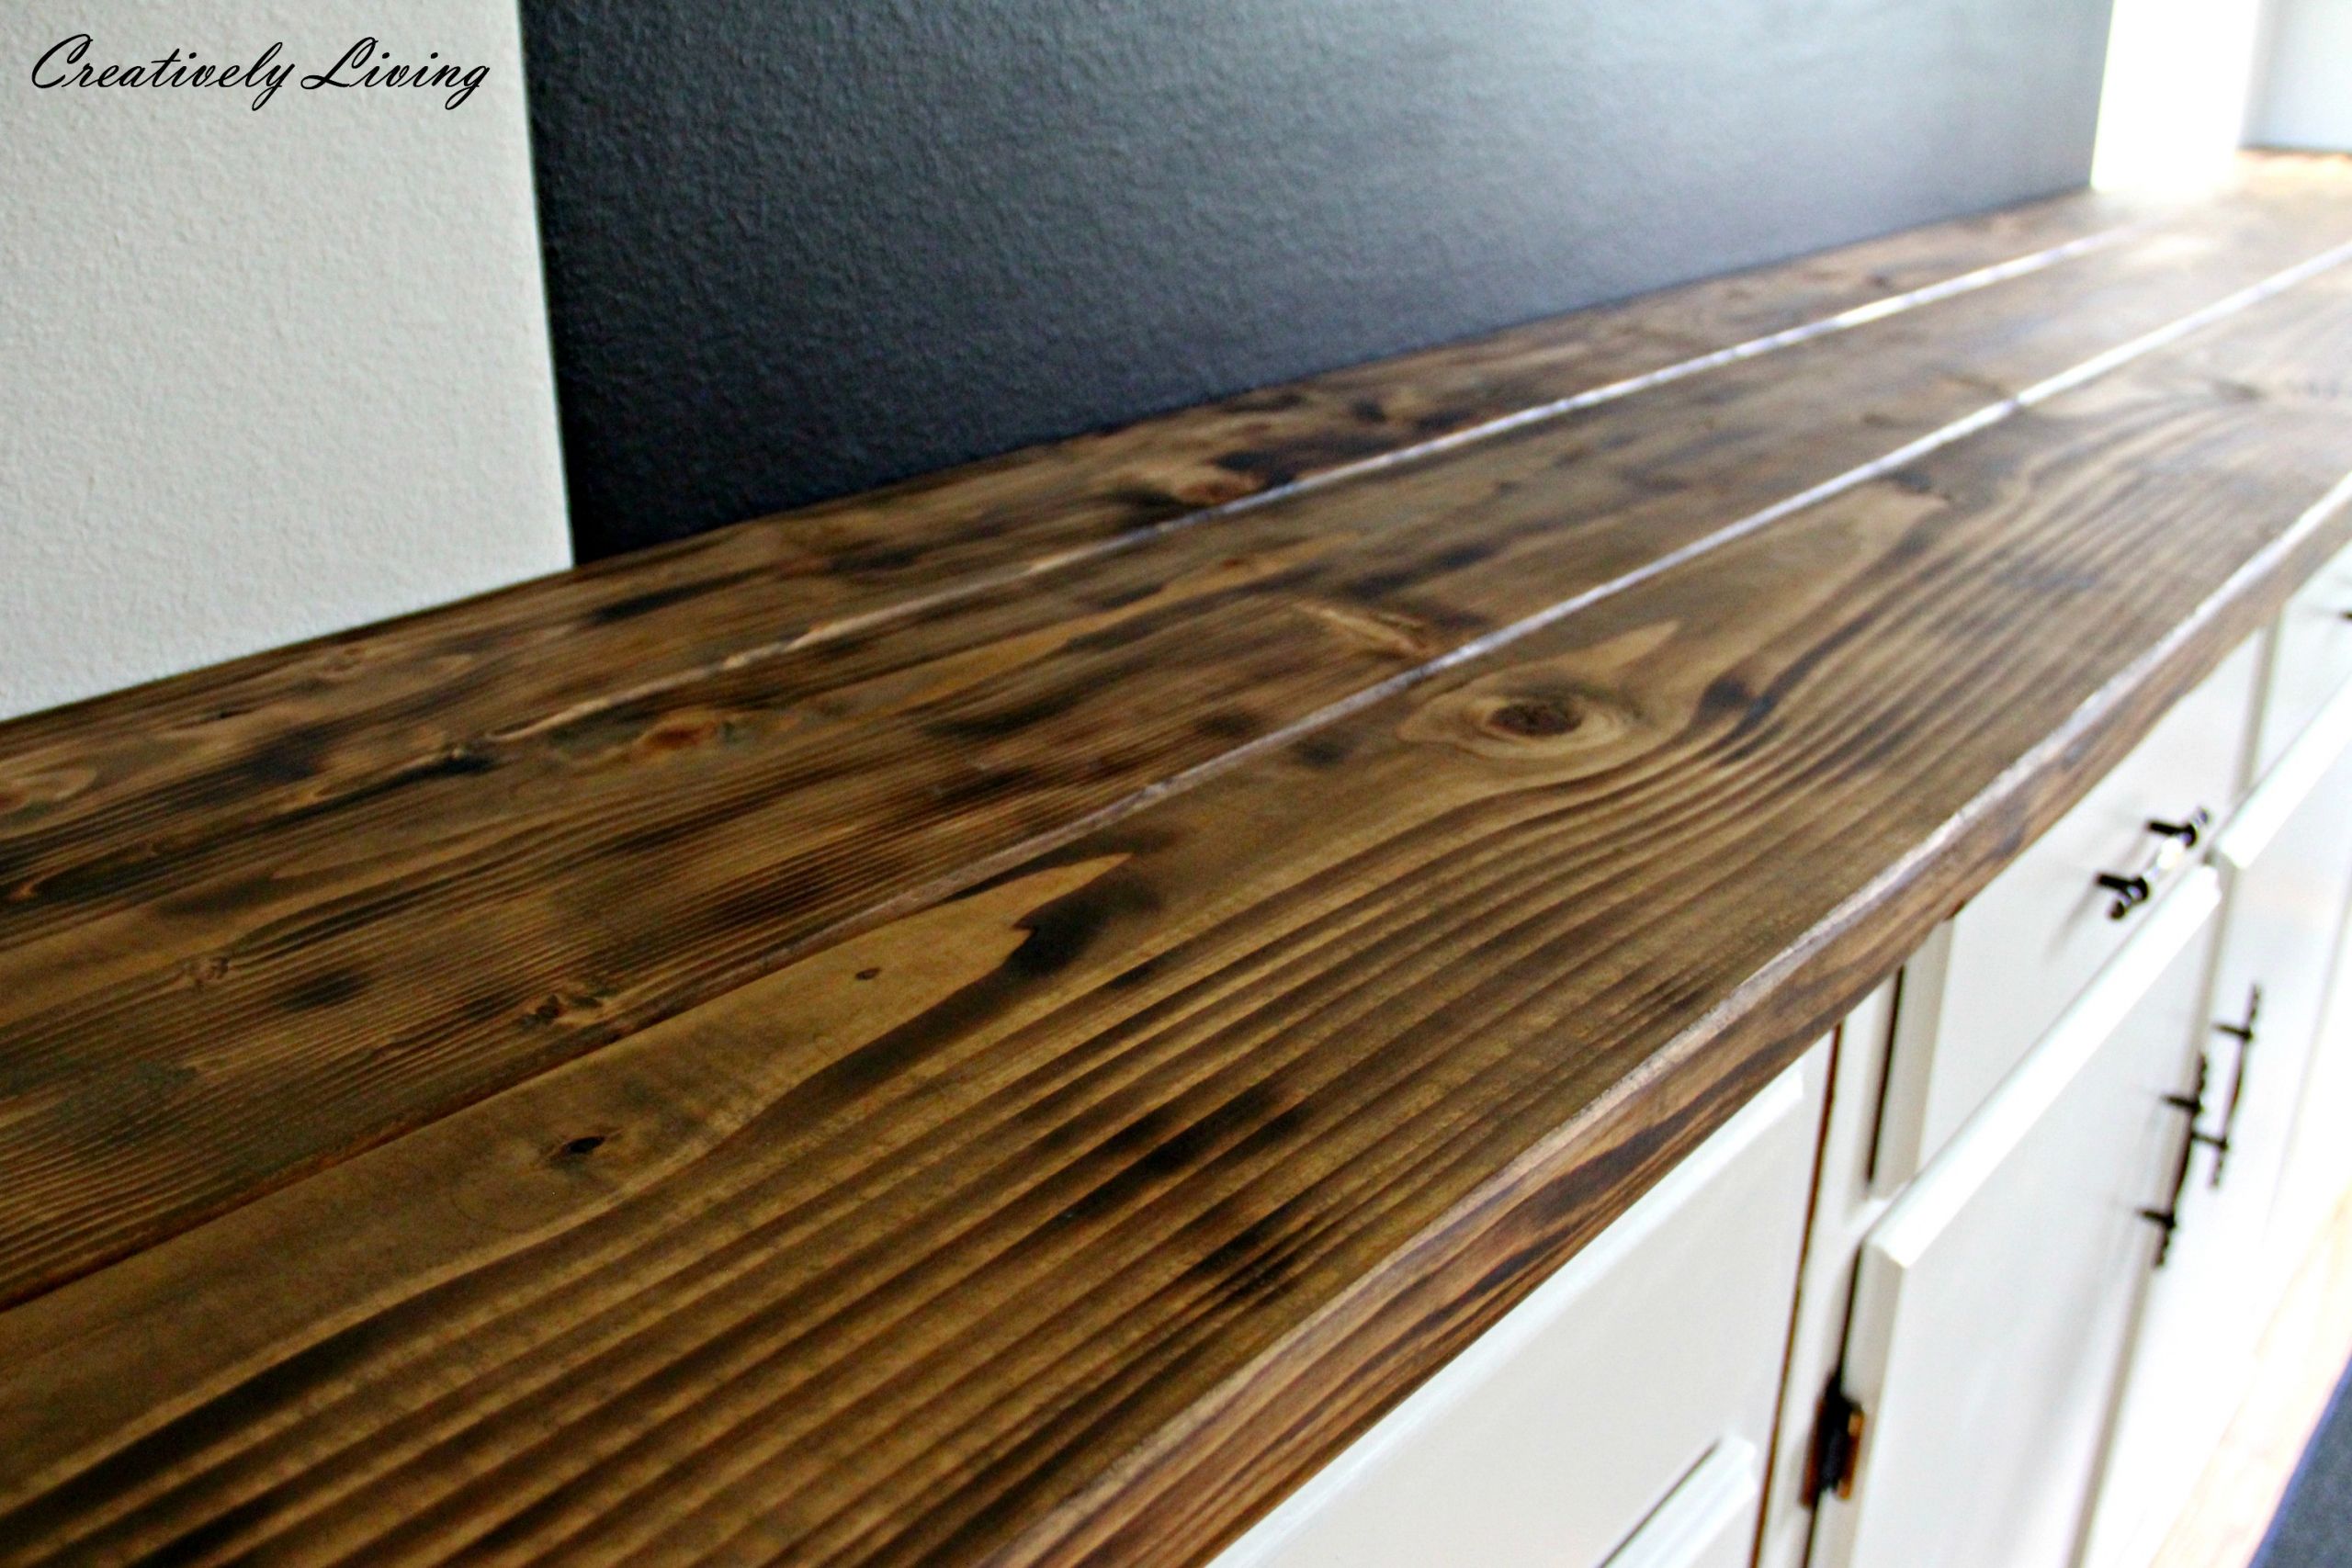 DIY Kitchen Countertops Wood
 Torched DIY Rustic Wood Counter Top for Under $50 by